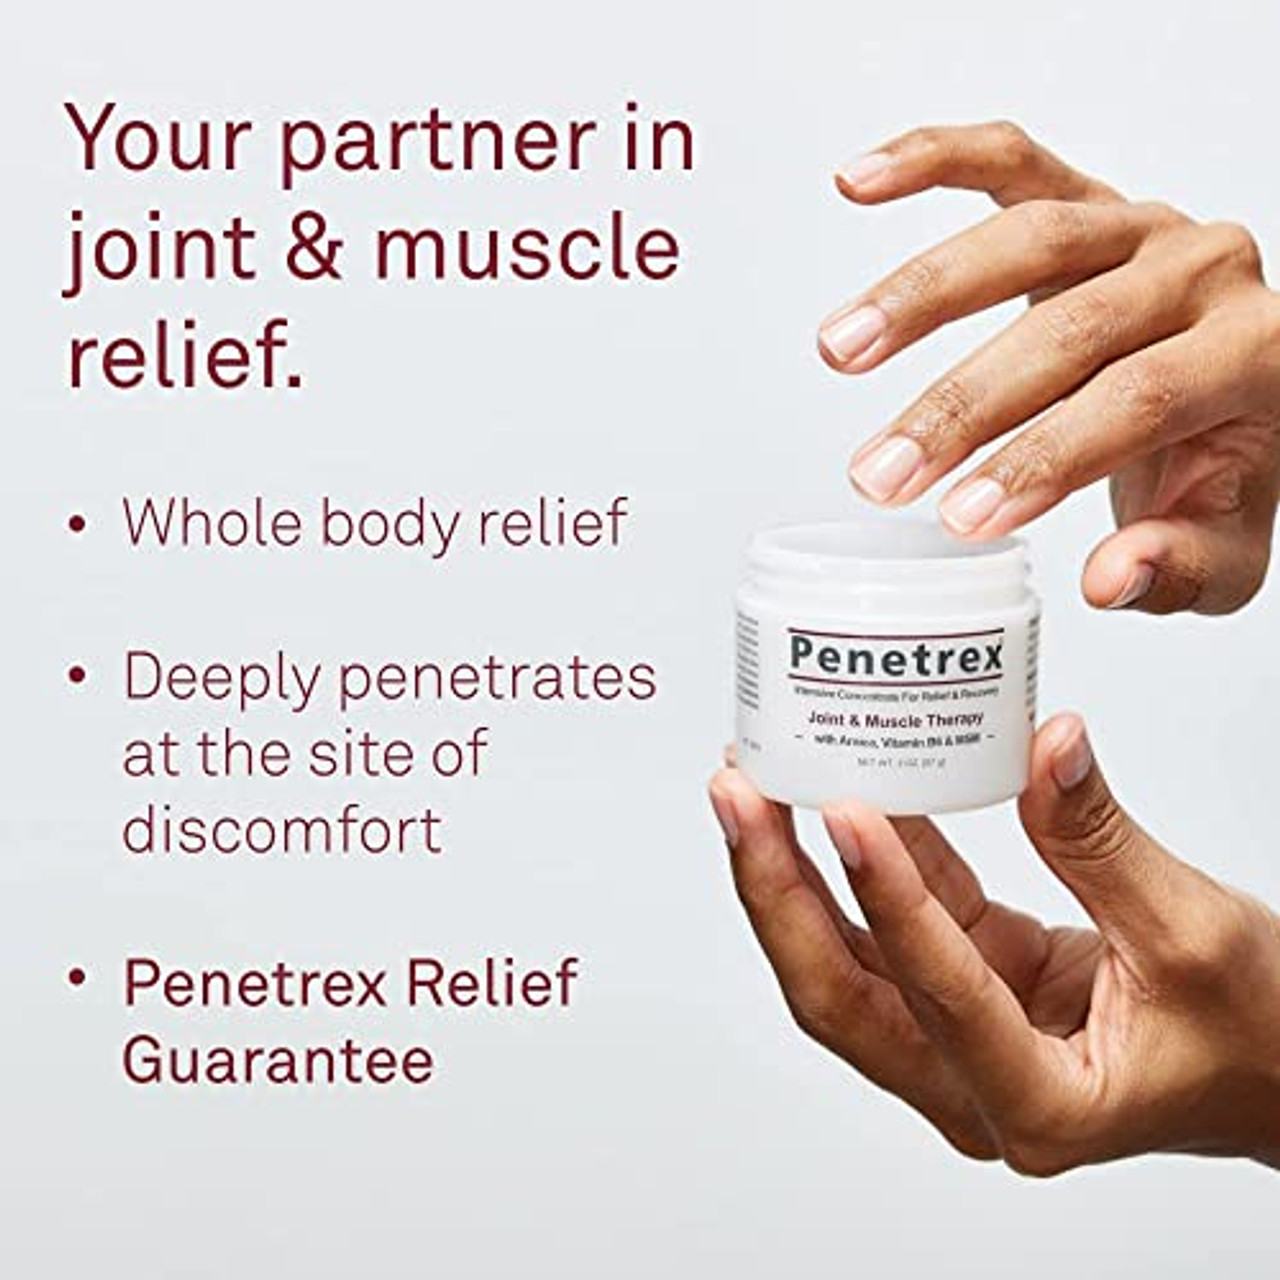 NEW Penetrex Soothing Joint & Muscle Pain Relief Cream with Hemp & Men